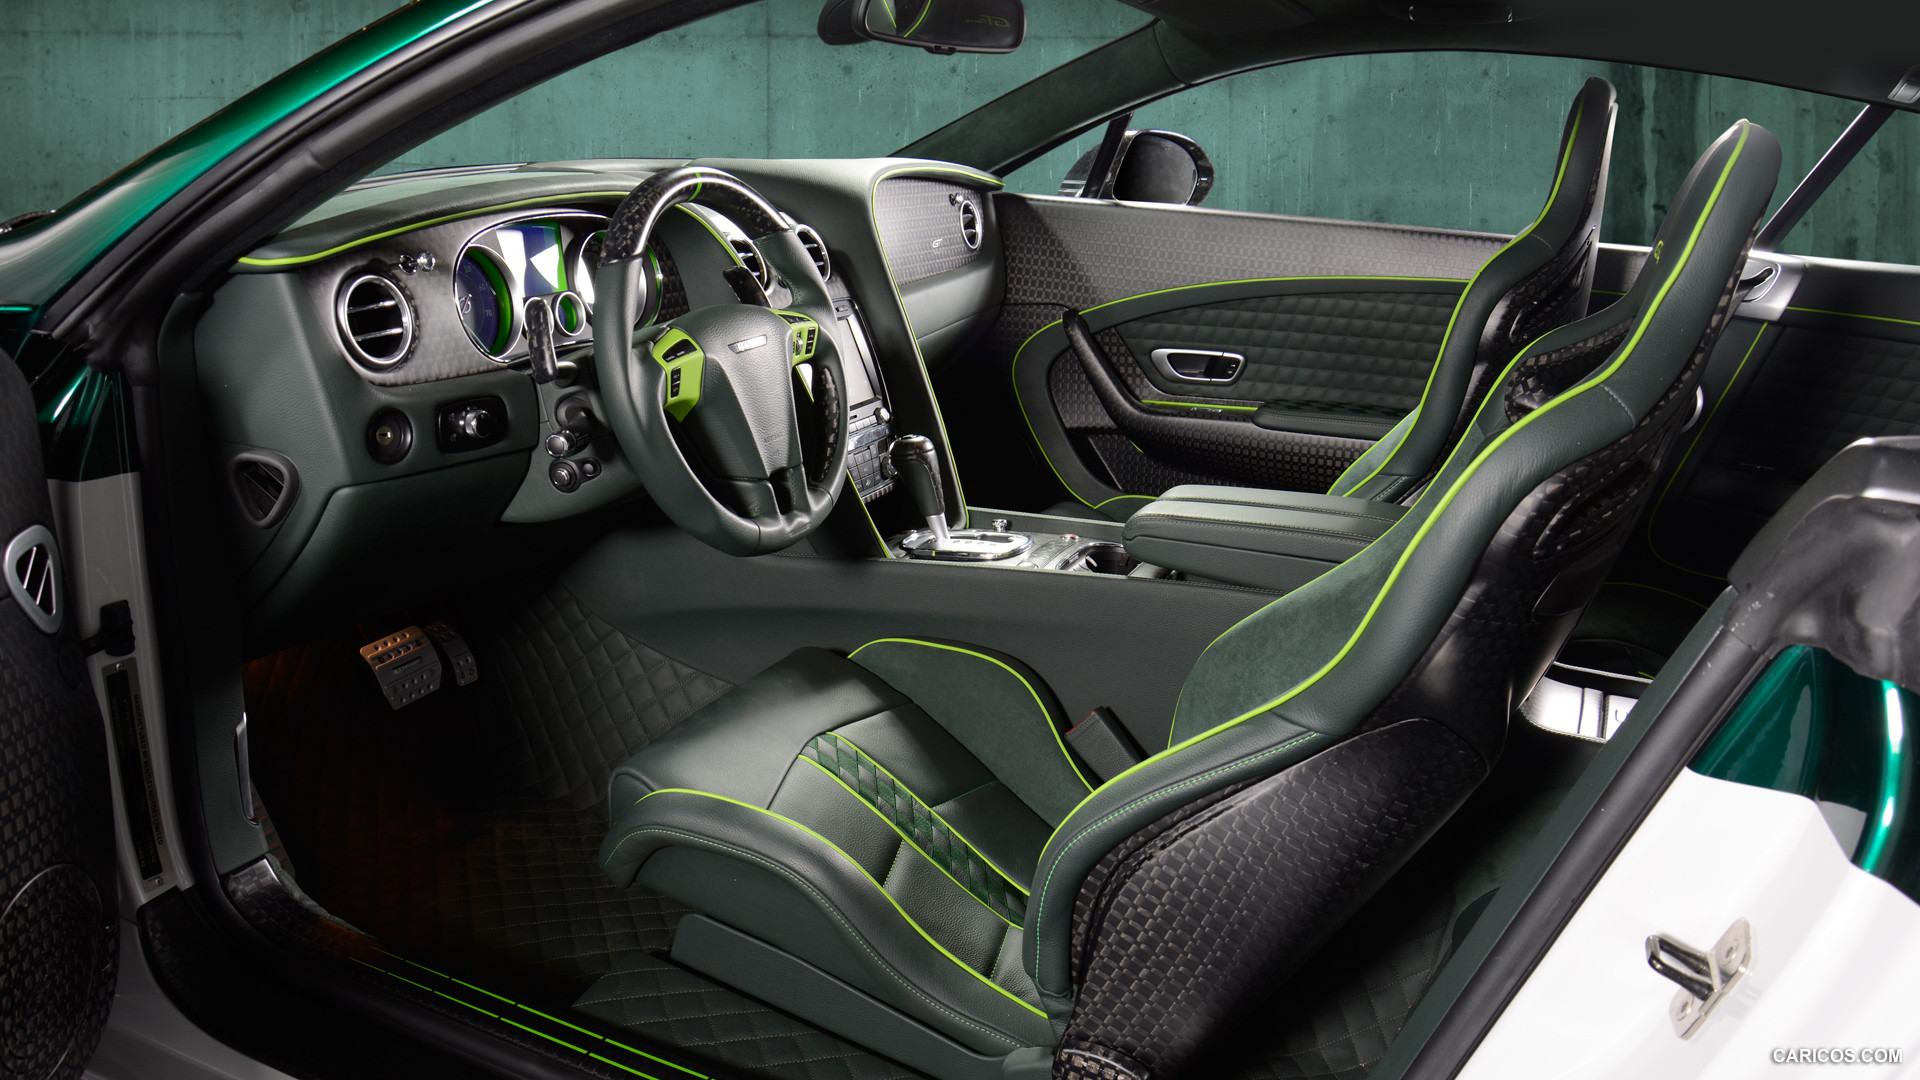 2015 Mansory GT Race based on Bentley Continental GT  - Interior, #5 of 7